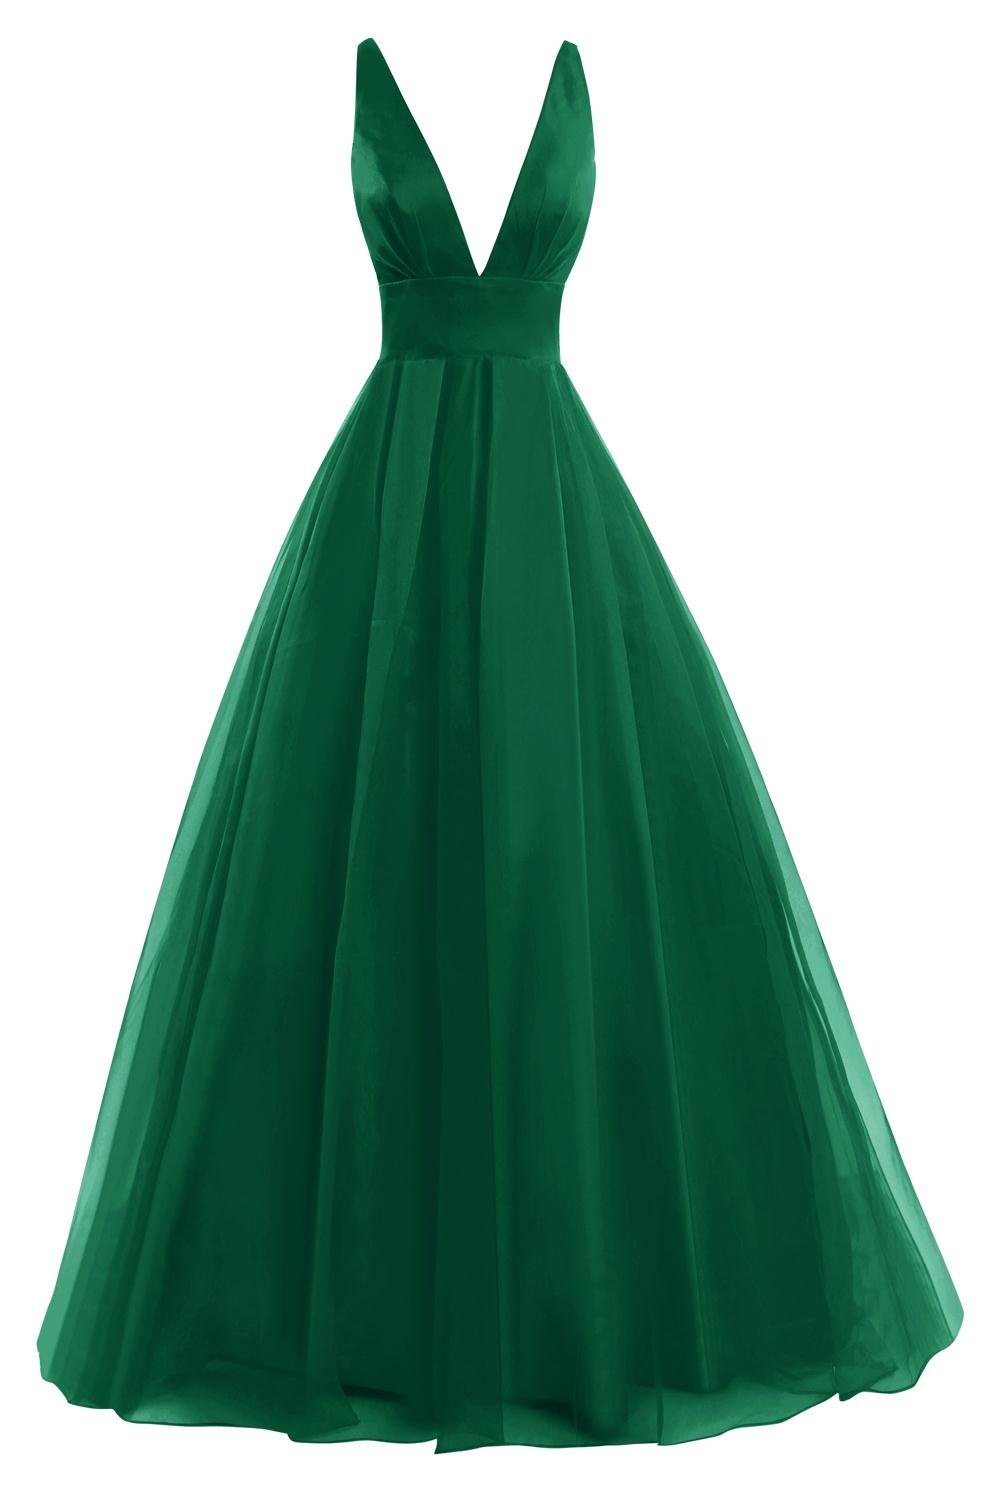 Long New Formal Evening Ball Gown Party Prom Bridesmaid Dress Stock Size 6-22 